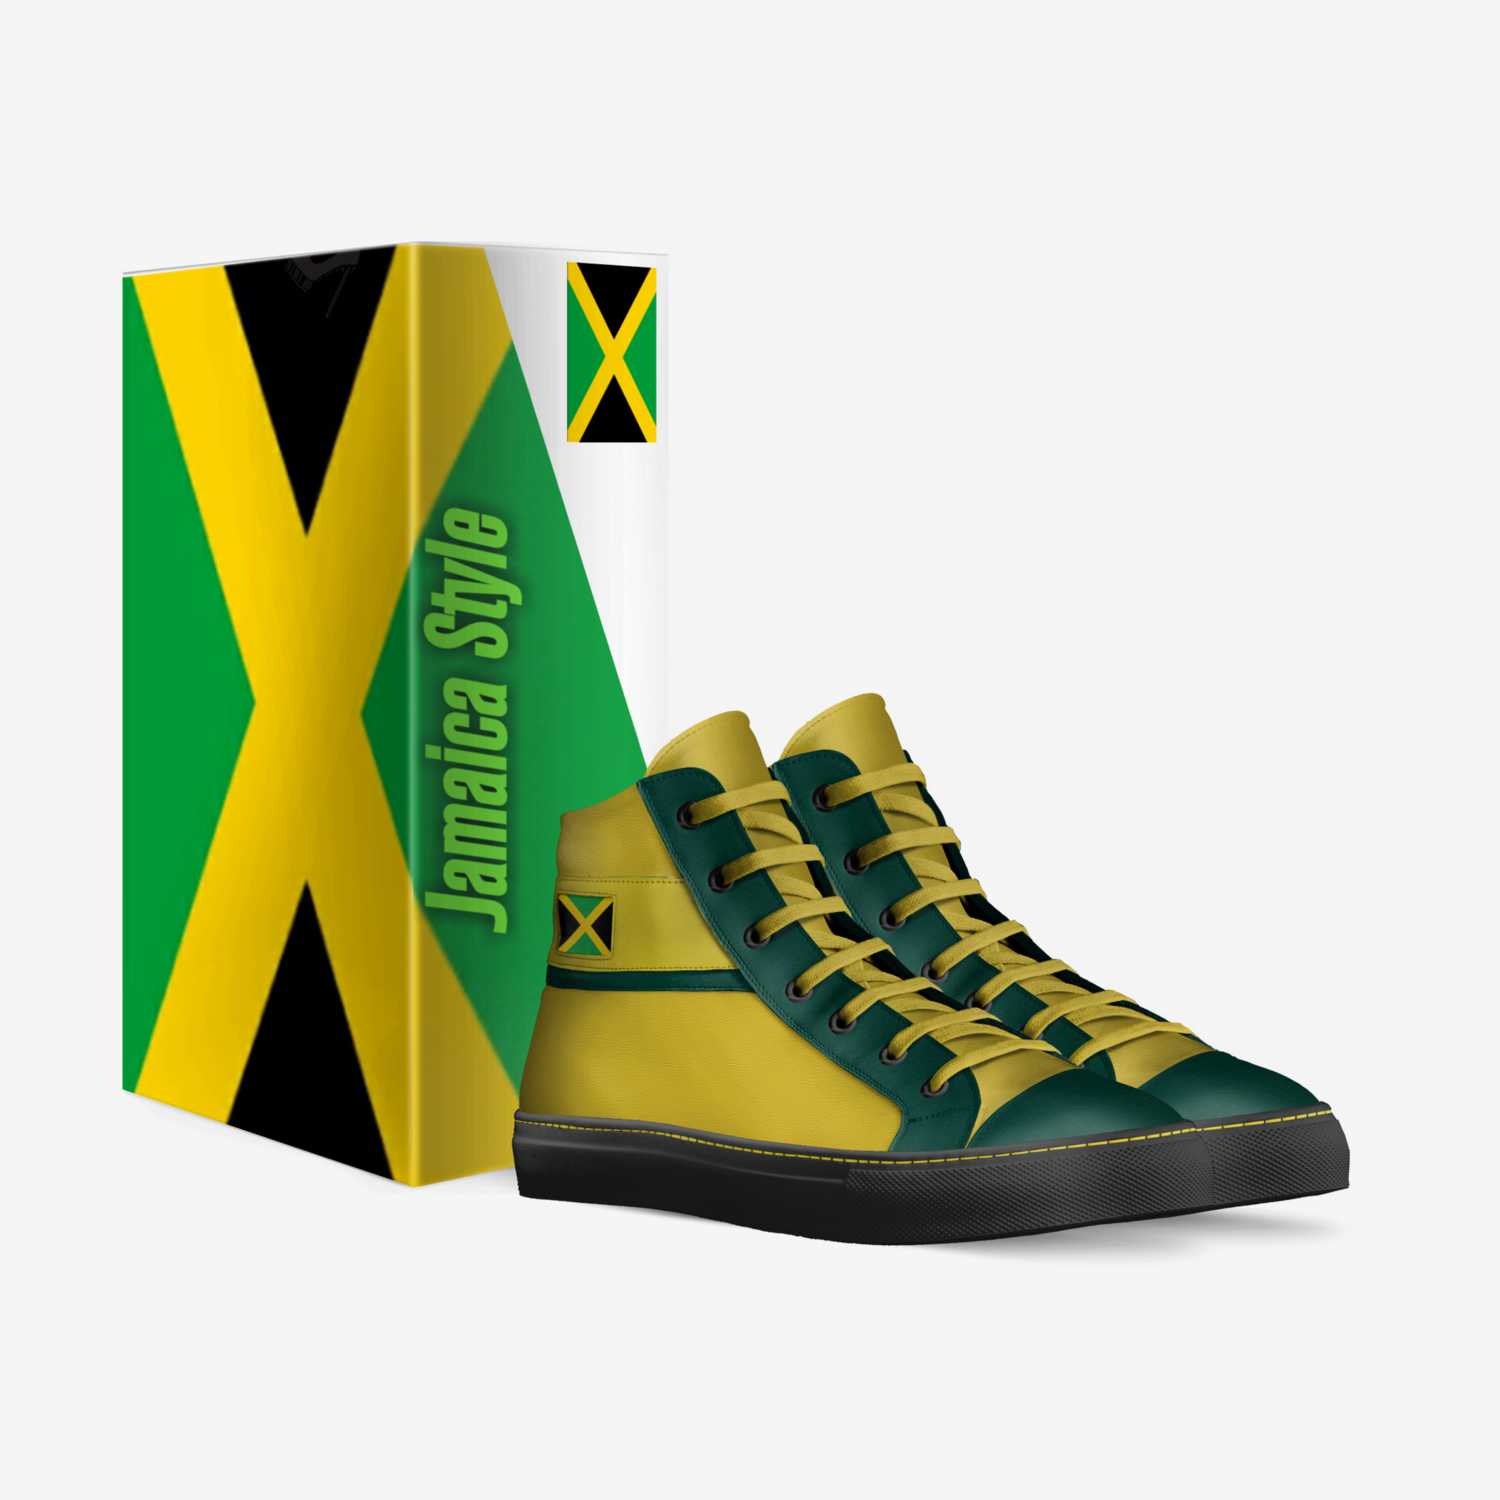 Jamaican Stylz custom made in Italy shoes by Natasha Robinson | Box view